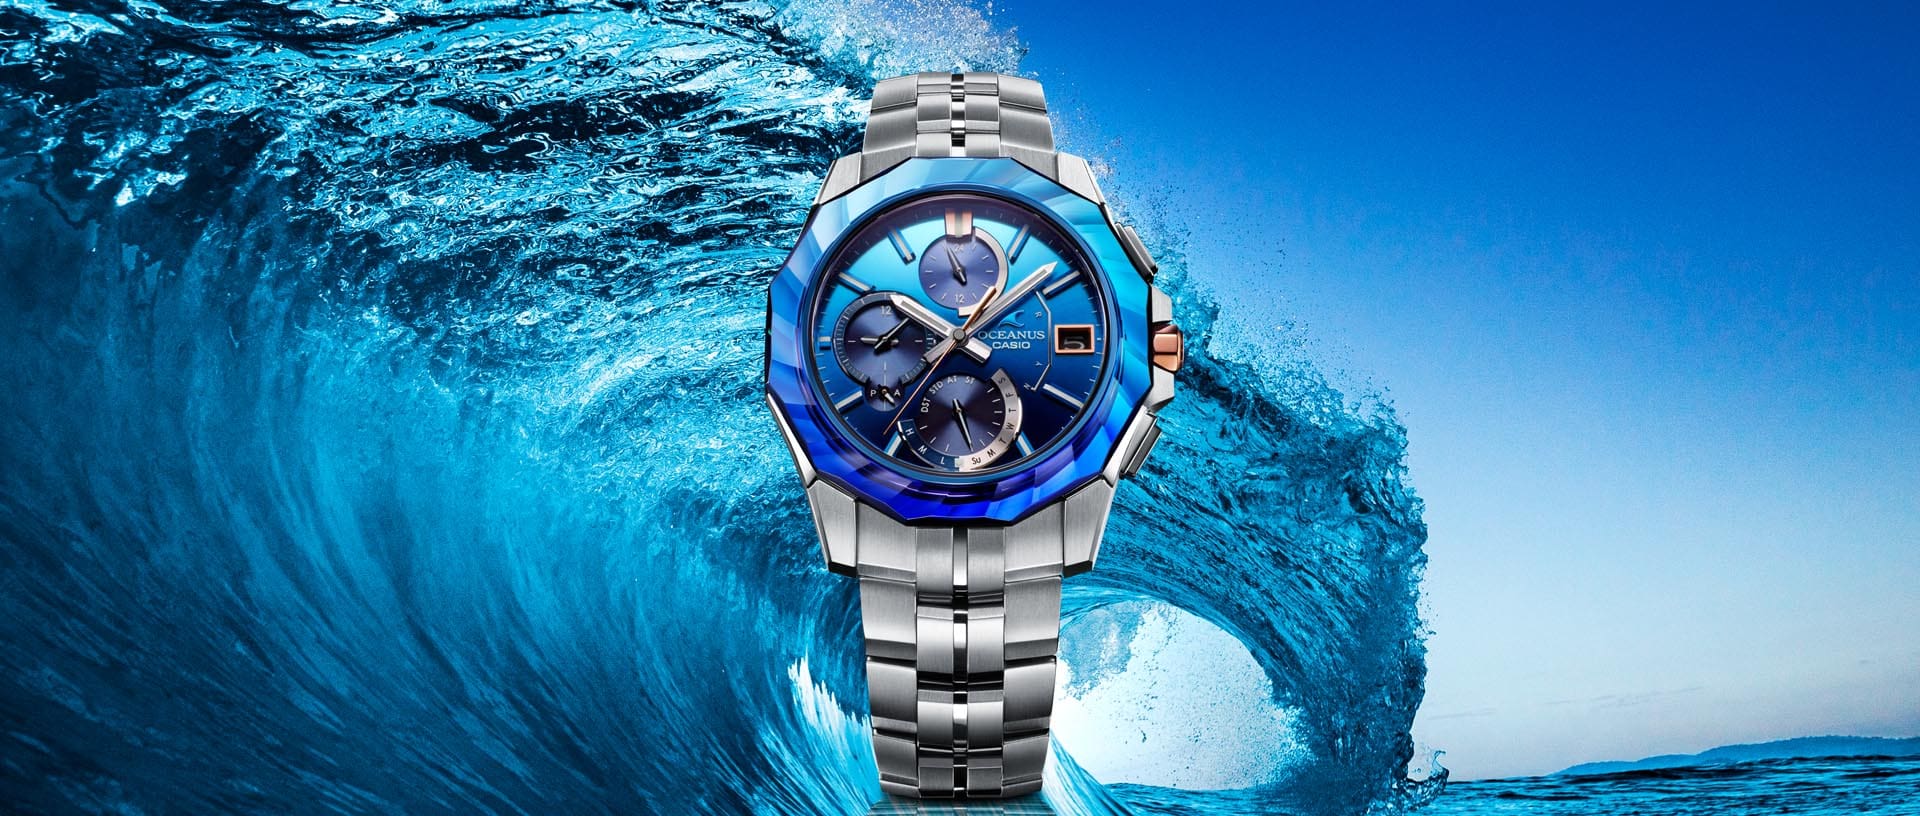 OCEANUS MANTA Series OCW-S6000SW Analog watch with blue bezel in front of a wave